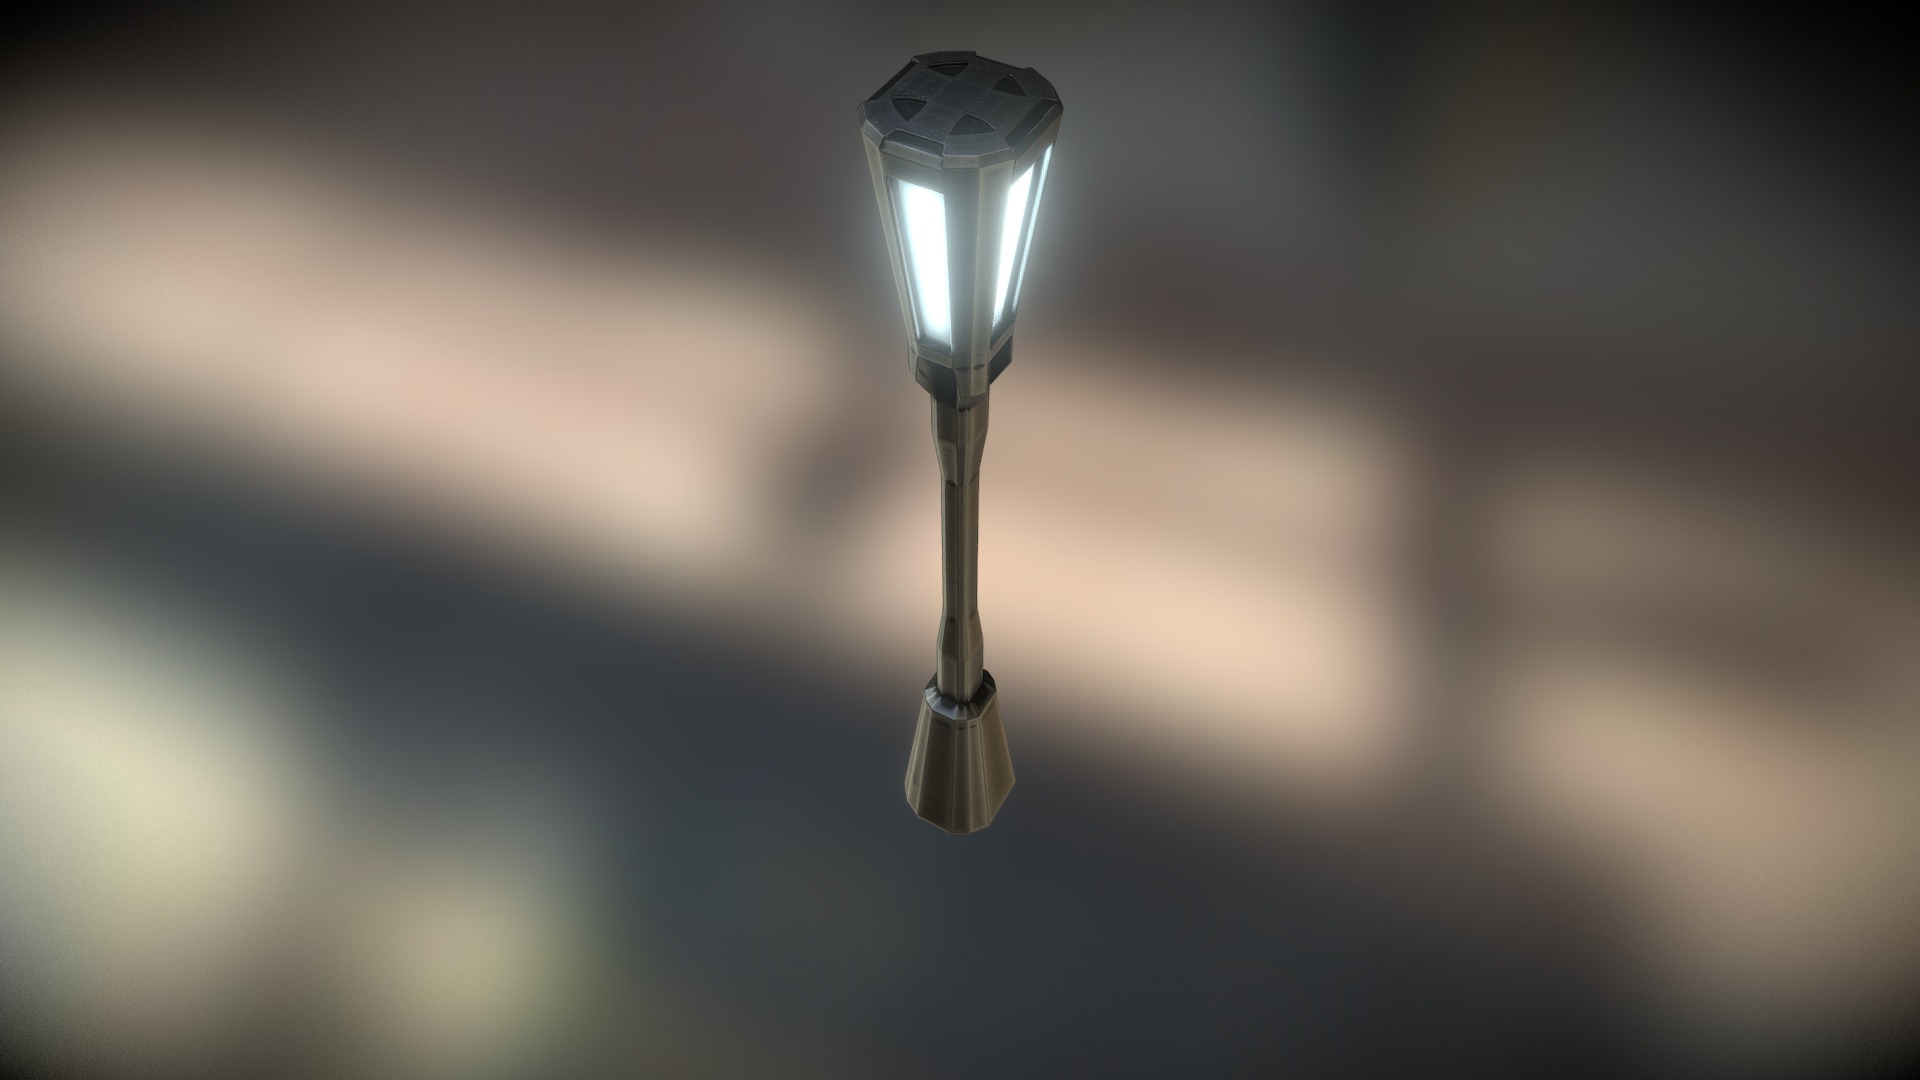 3D model Sci-Fi Streetlamp - This is a 3D model of the Sci-Fi Streetlamp. The 3D model is about a light bulb on a pole.